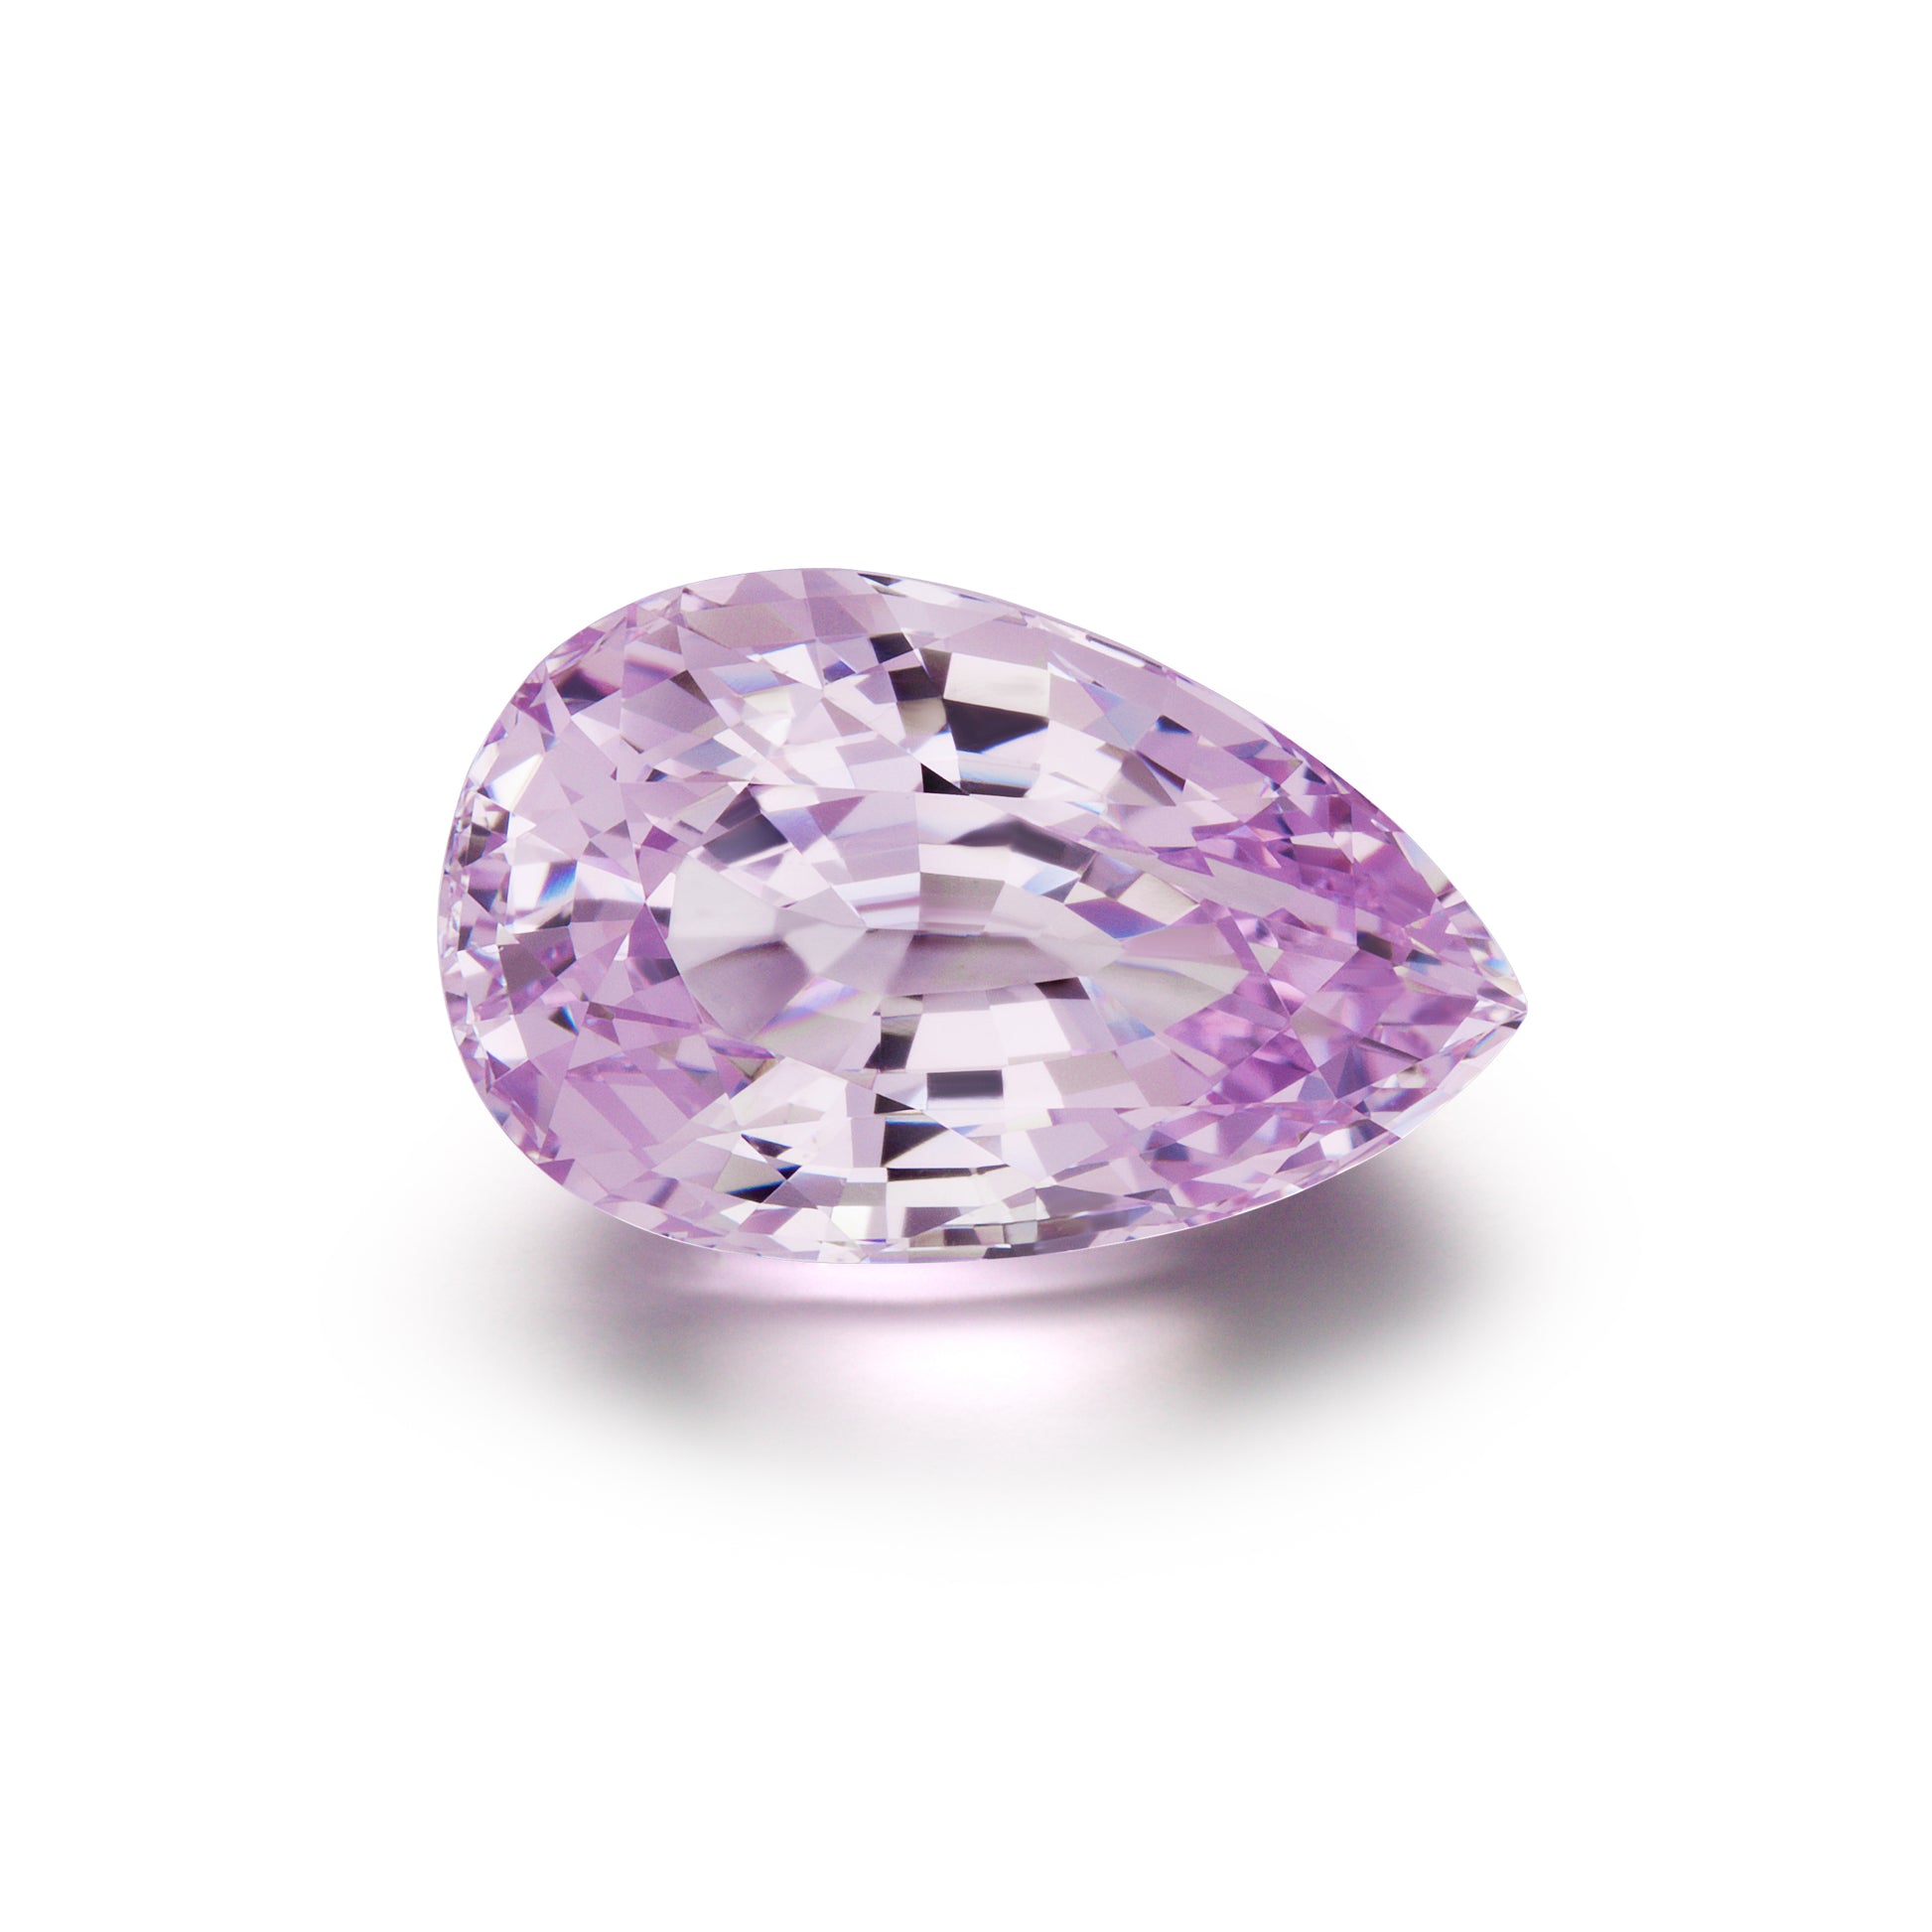 Image of Loose Pear Shaped Lilac Gem